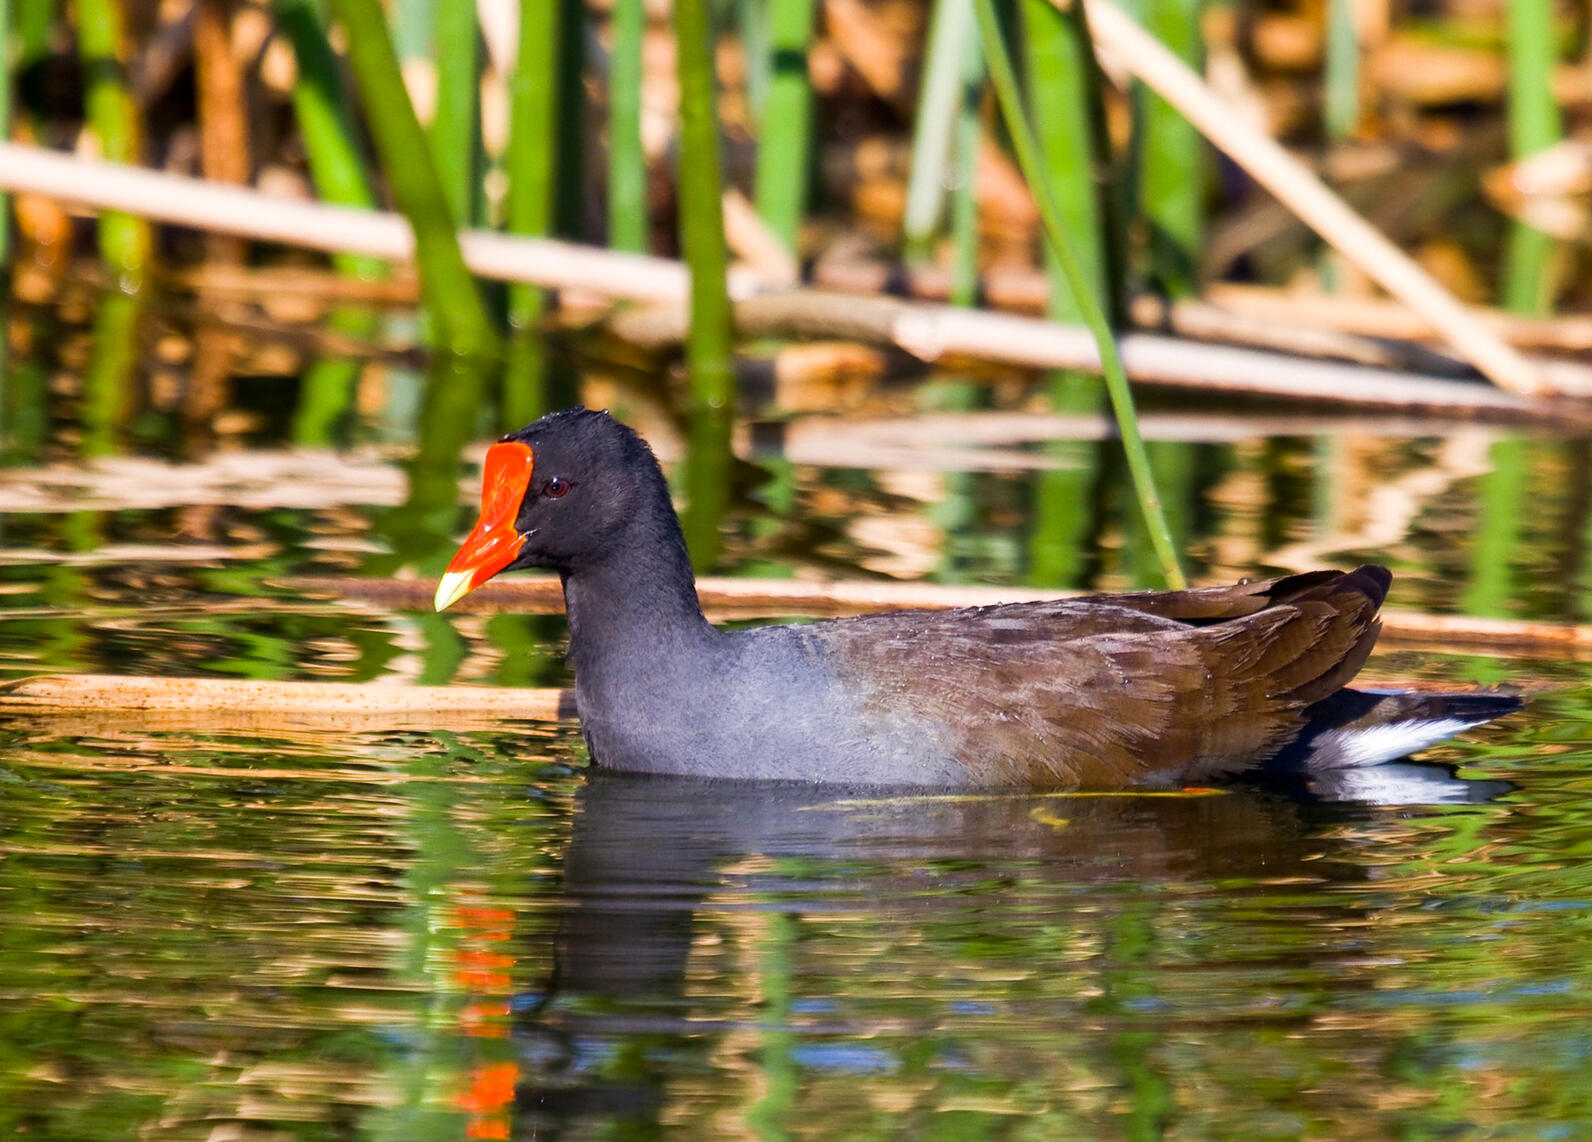 Common Gallinules are related to American Coots, and the two species are often found together.